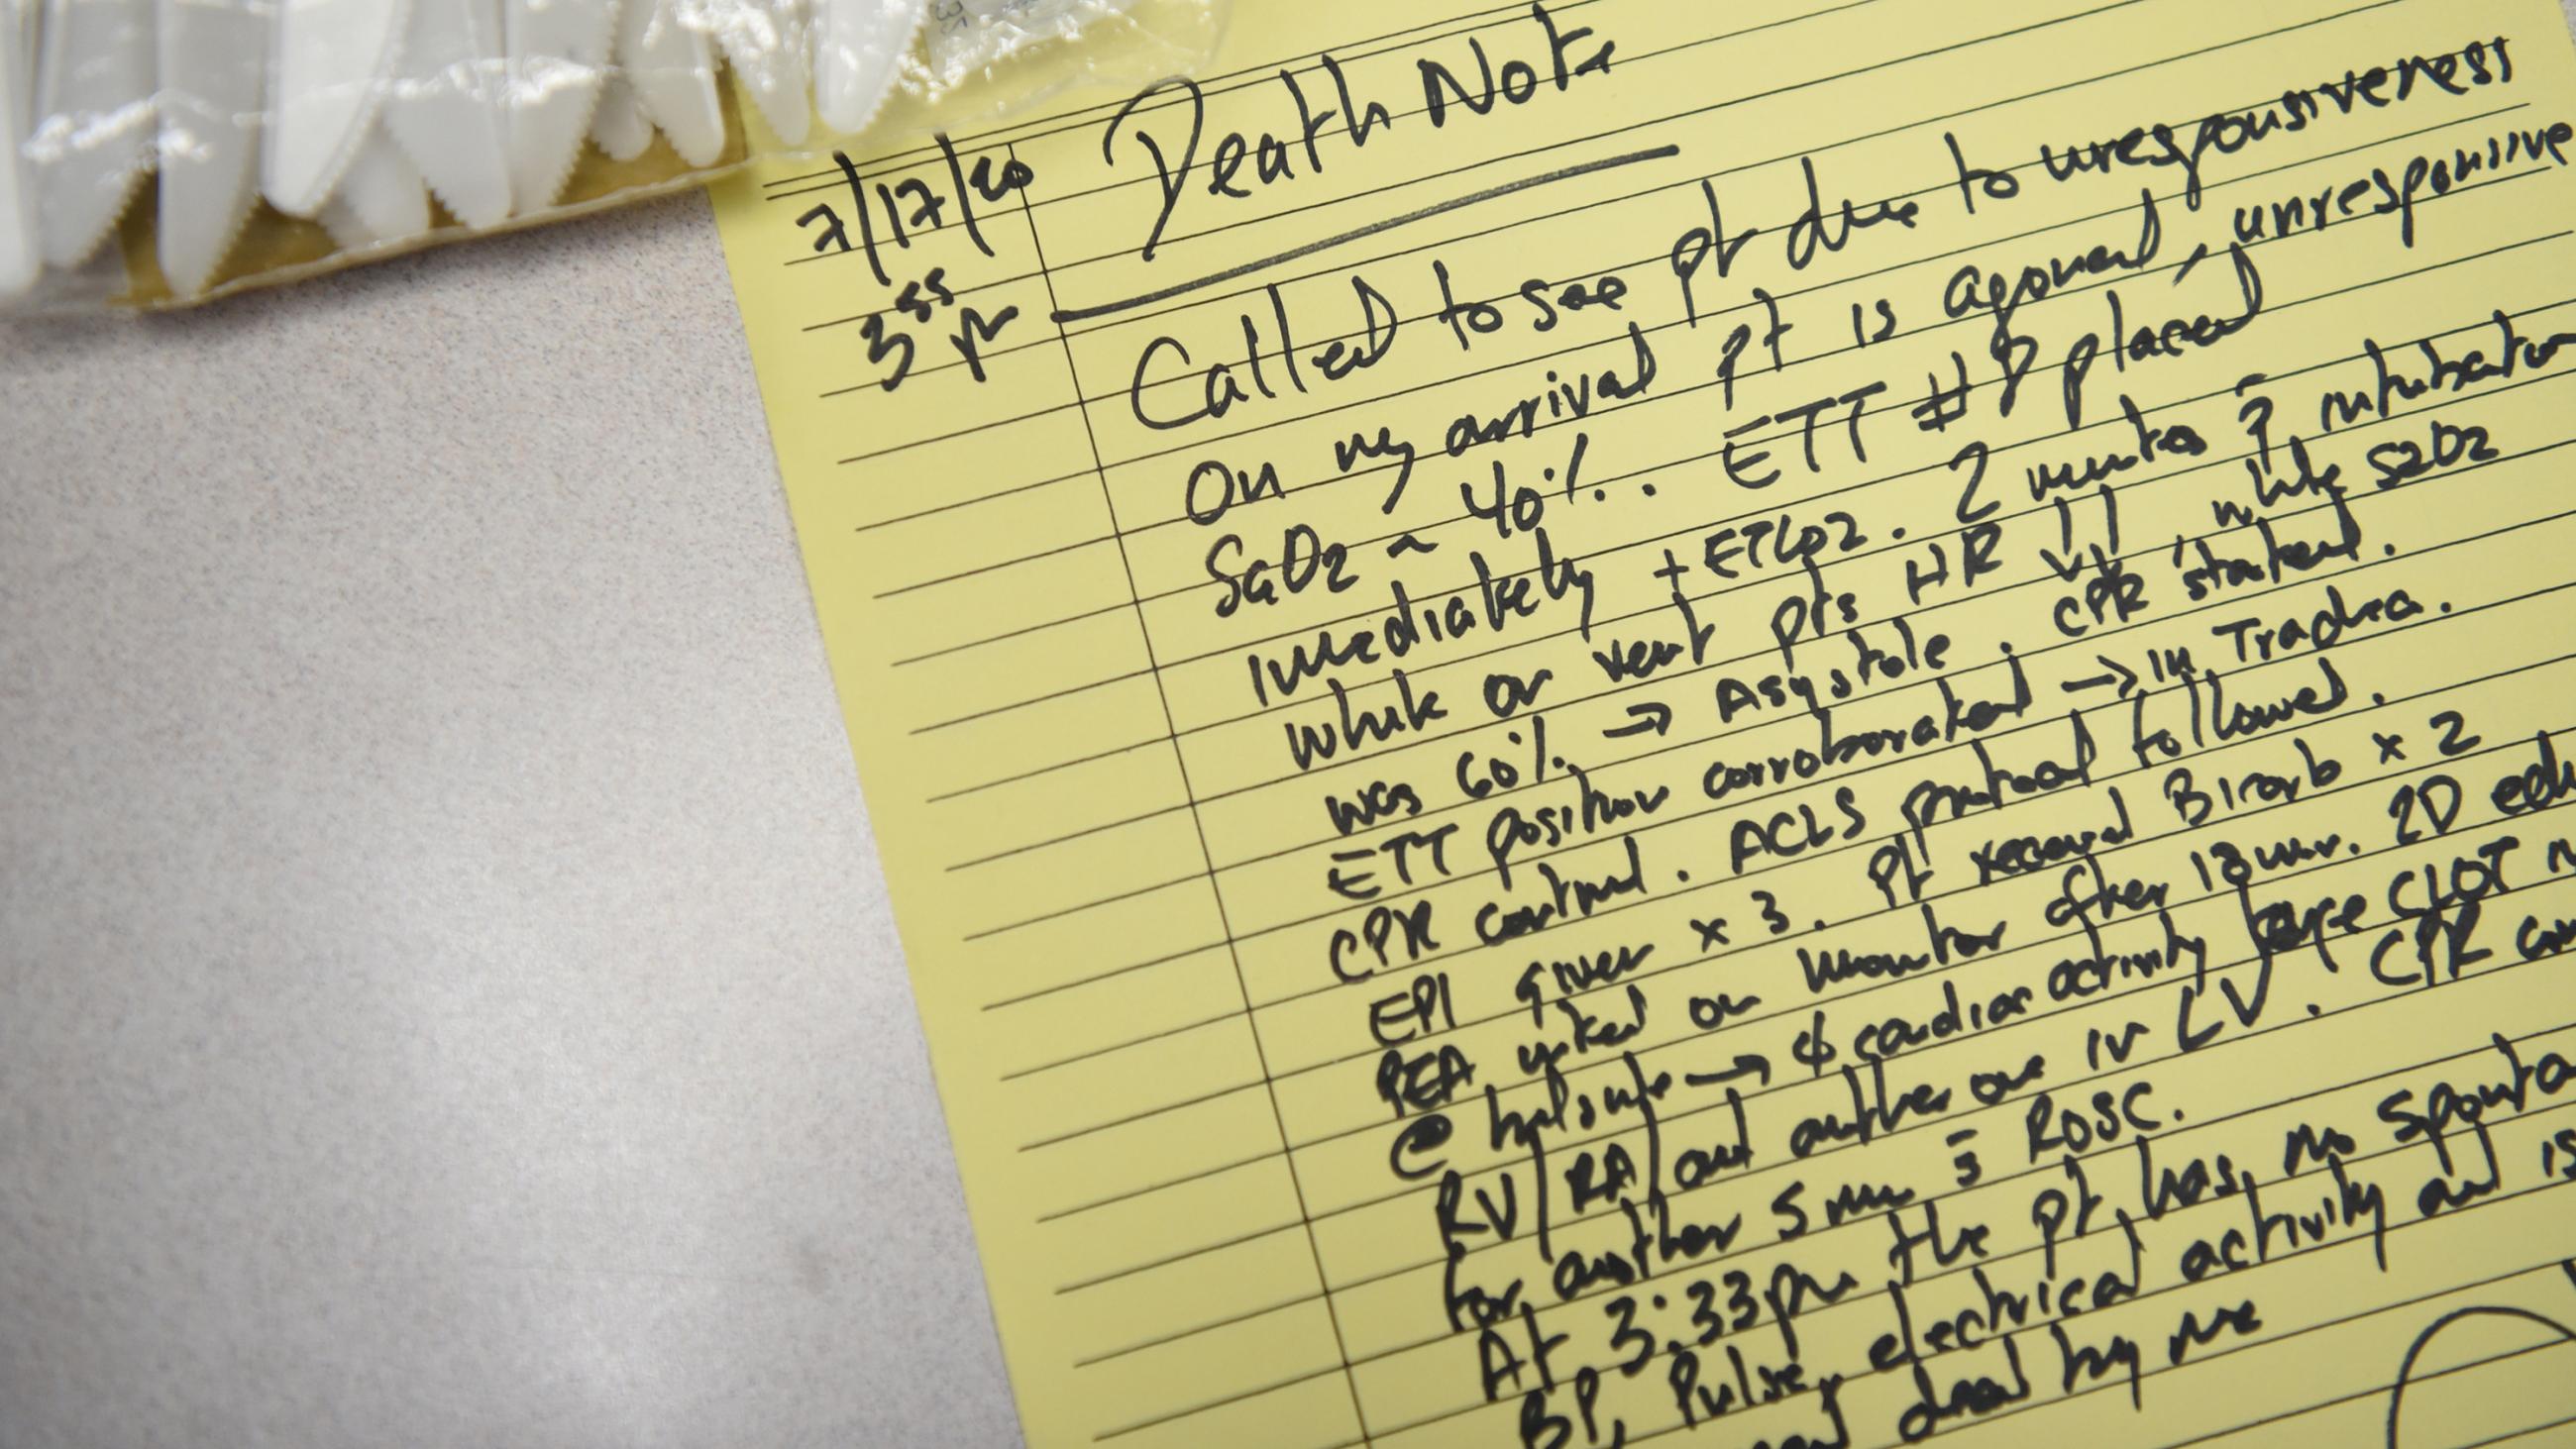 The photo shows a hand-written note with lots of detailed medical observations on a yellow pad. 